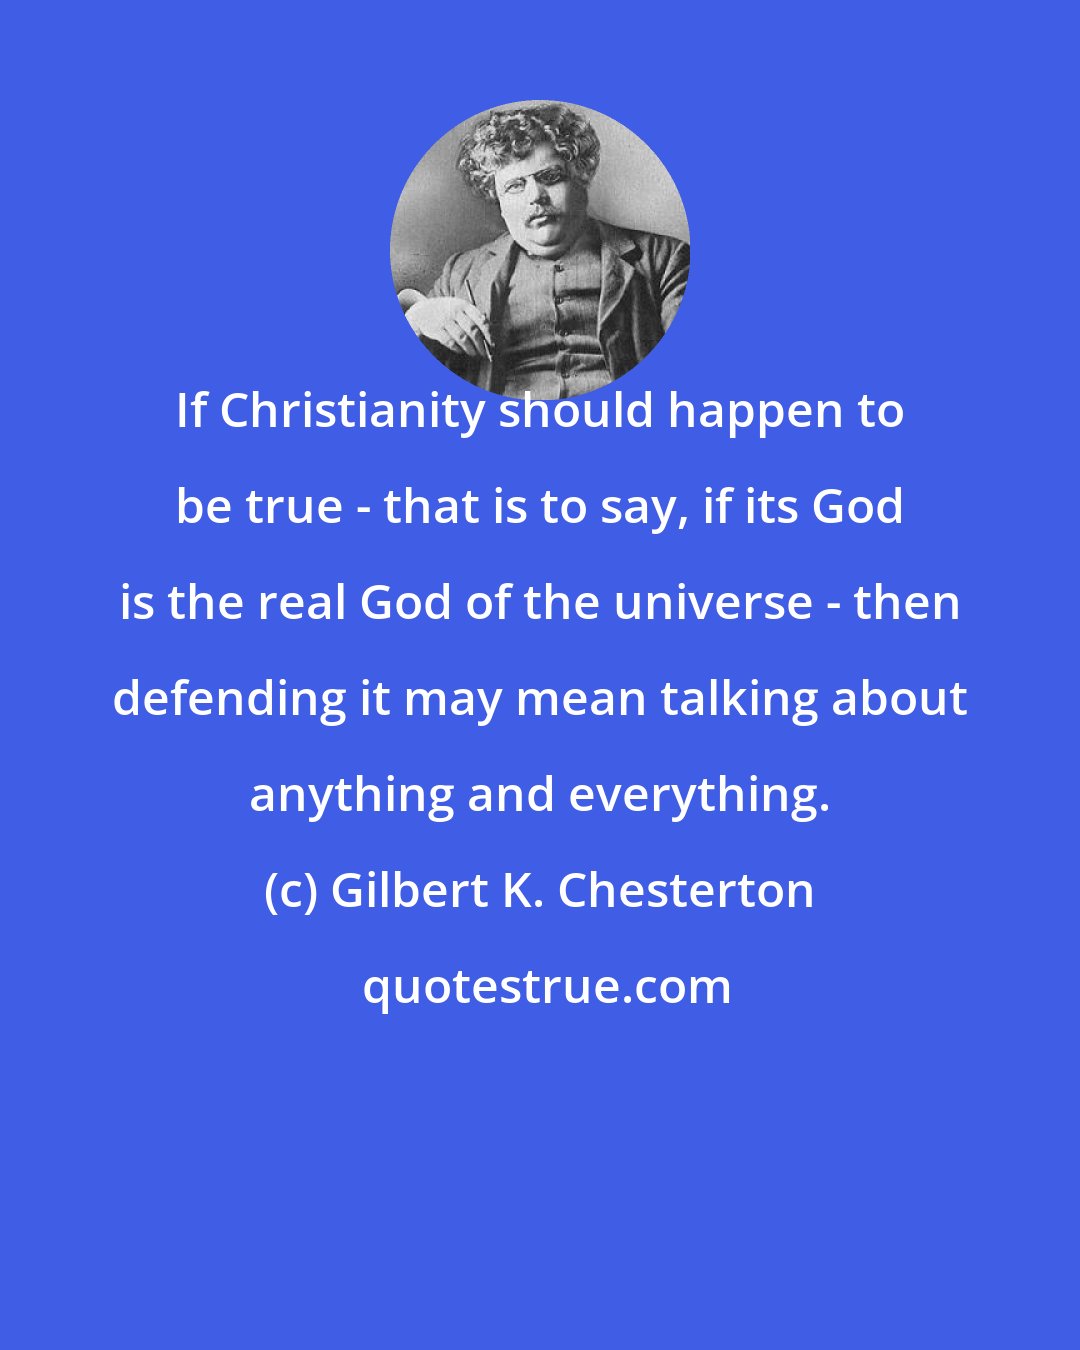 Gilbert K. Chesterton: If Christianity should happen to be true - that is to say, if its God is the real God of the universe - then defending it may mean talking about anything and everything.